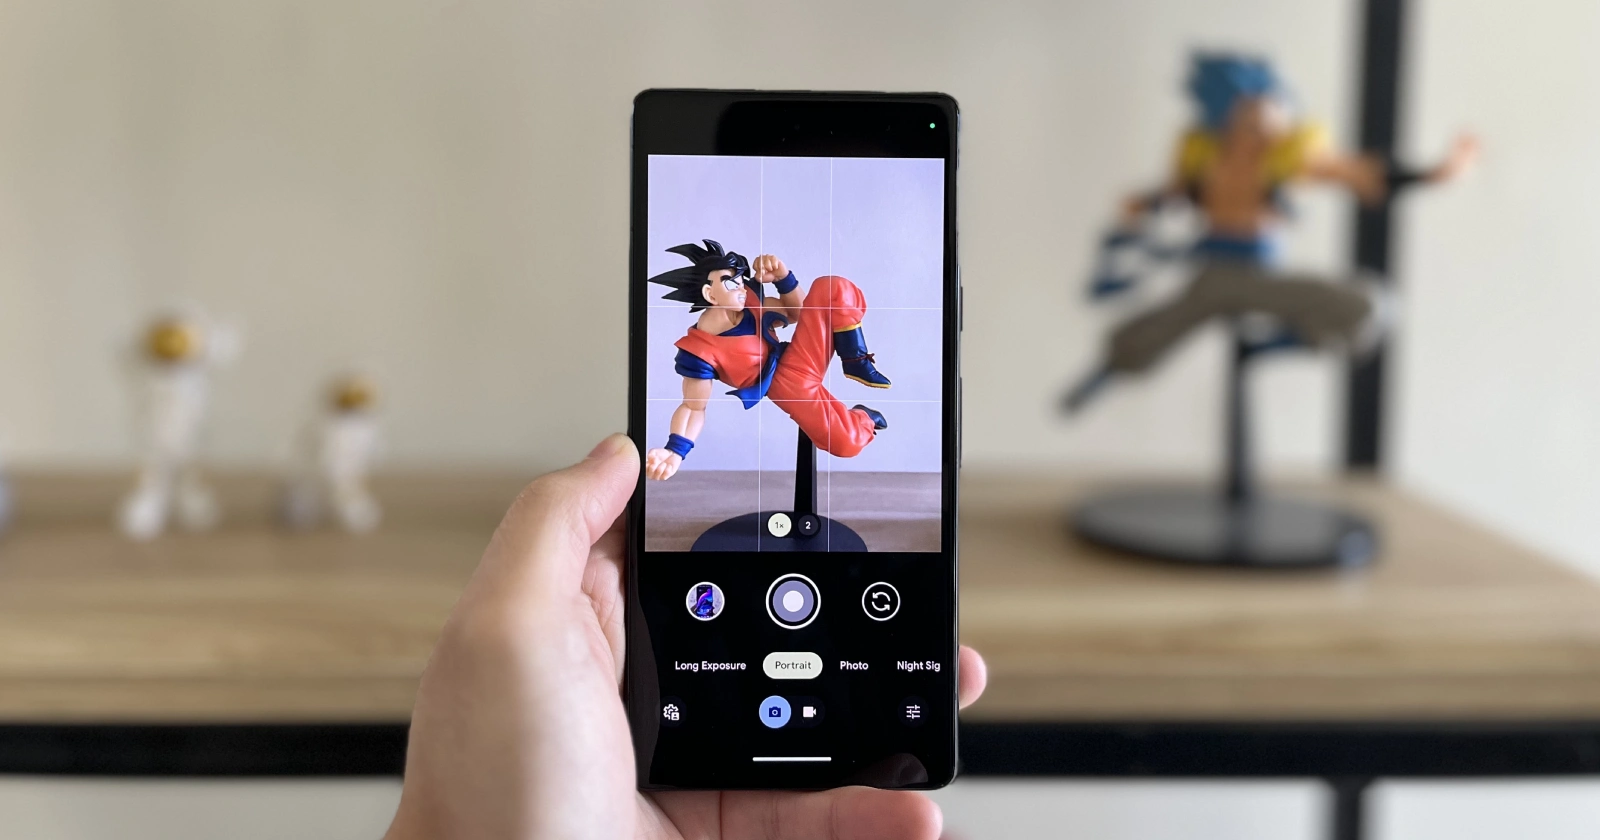 Google may have silently fixed Pixel 7 high-pitched noise in videos with the March update